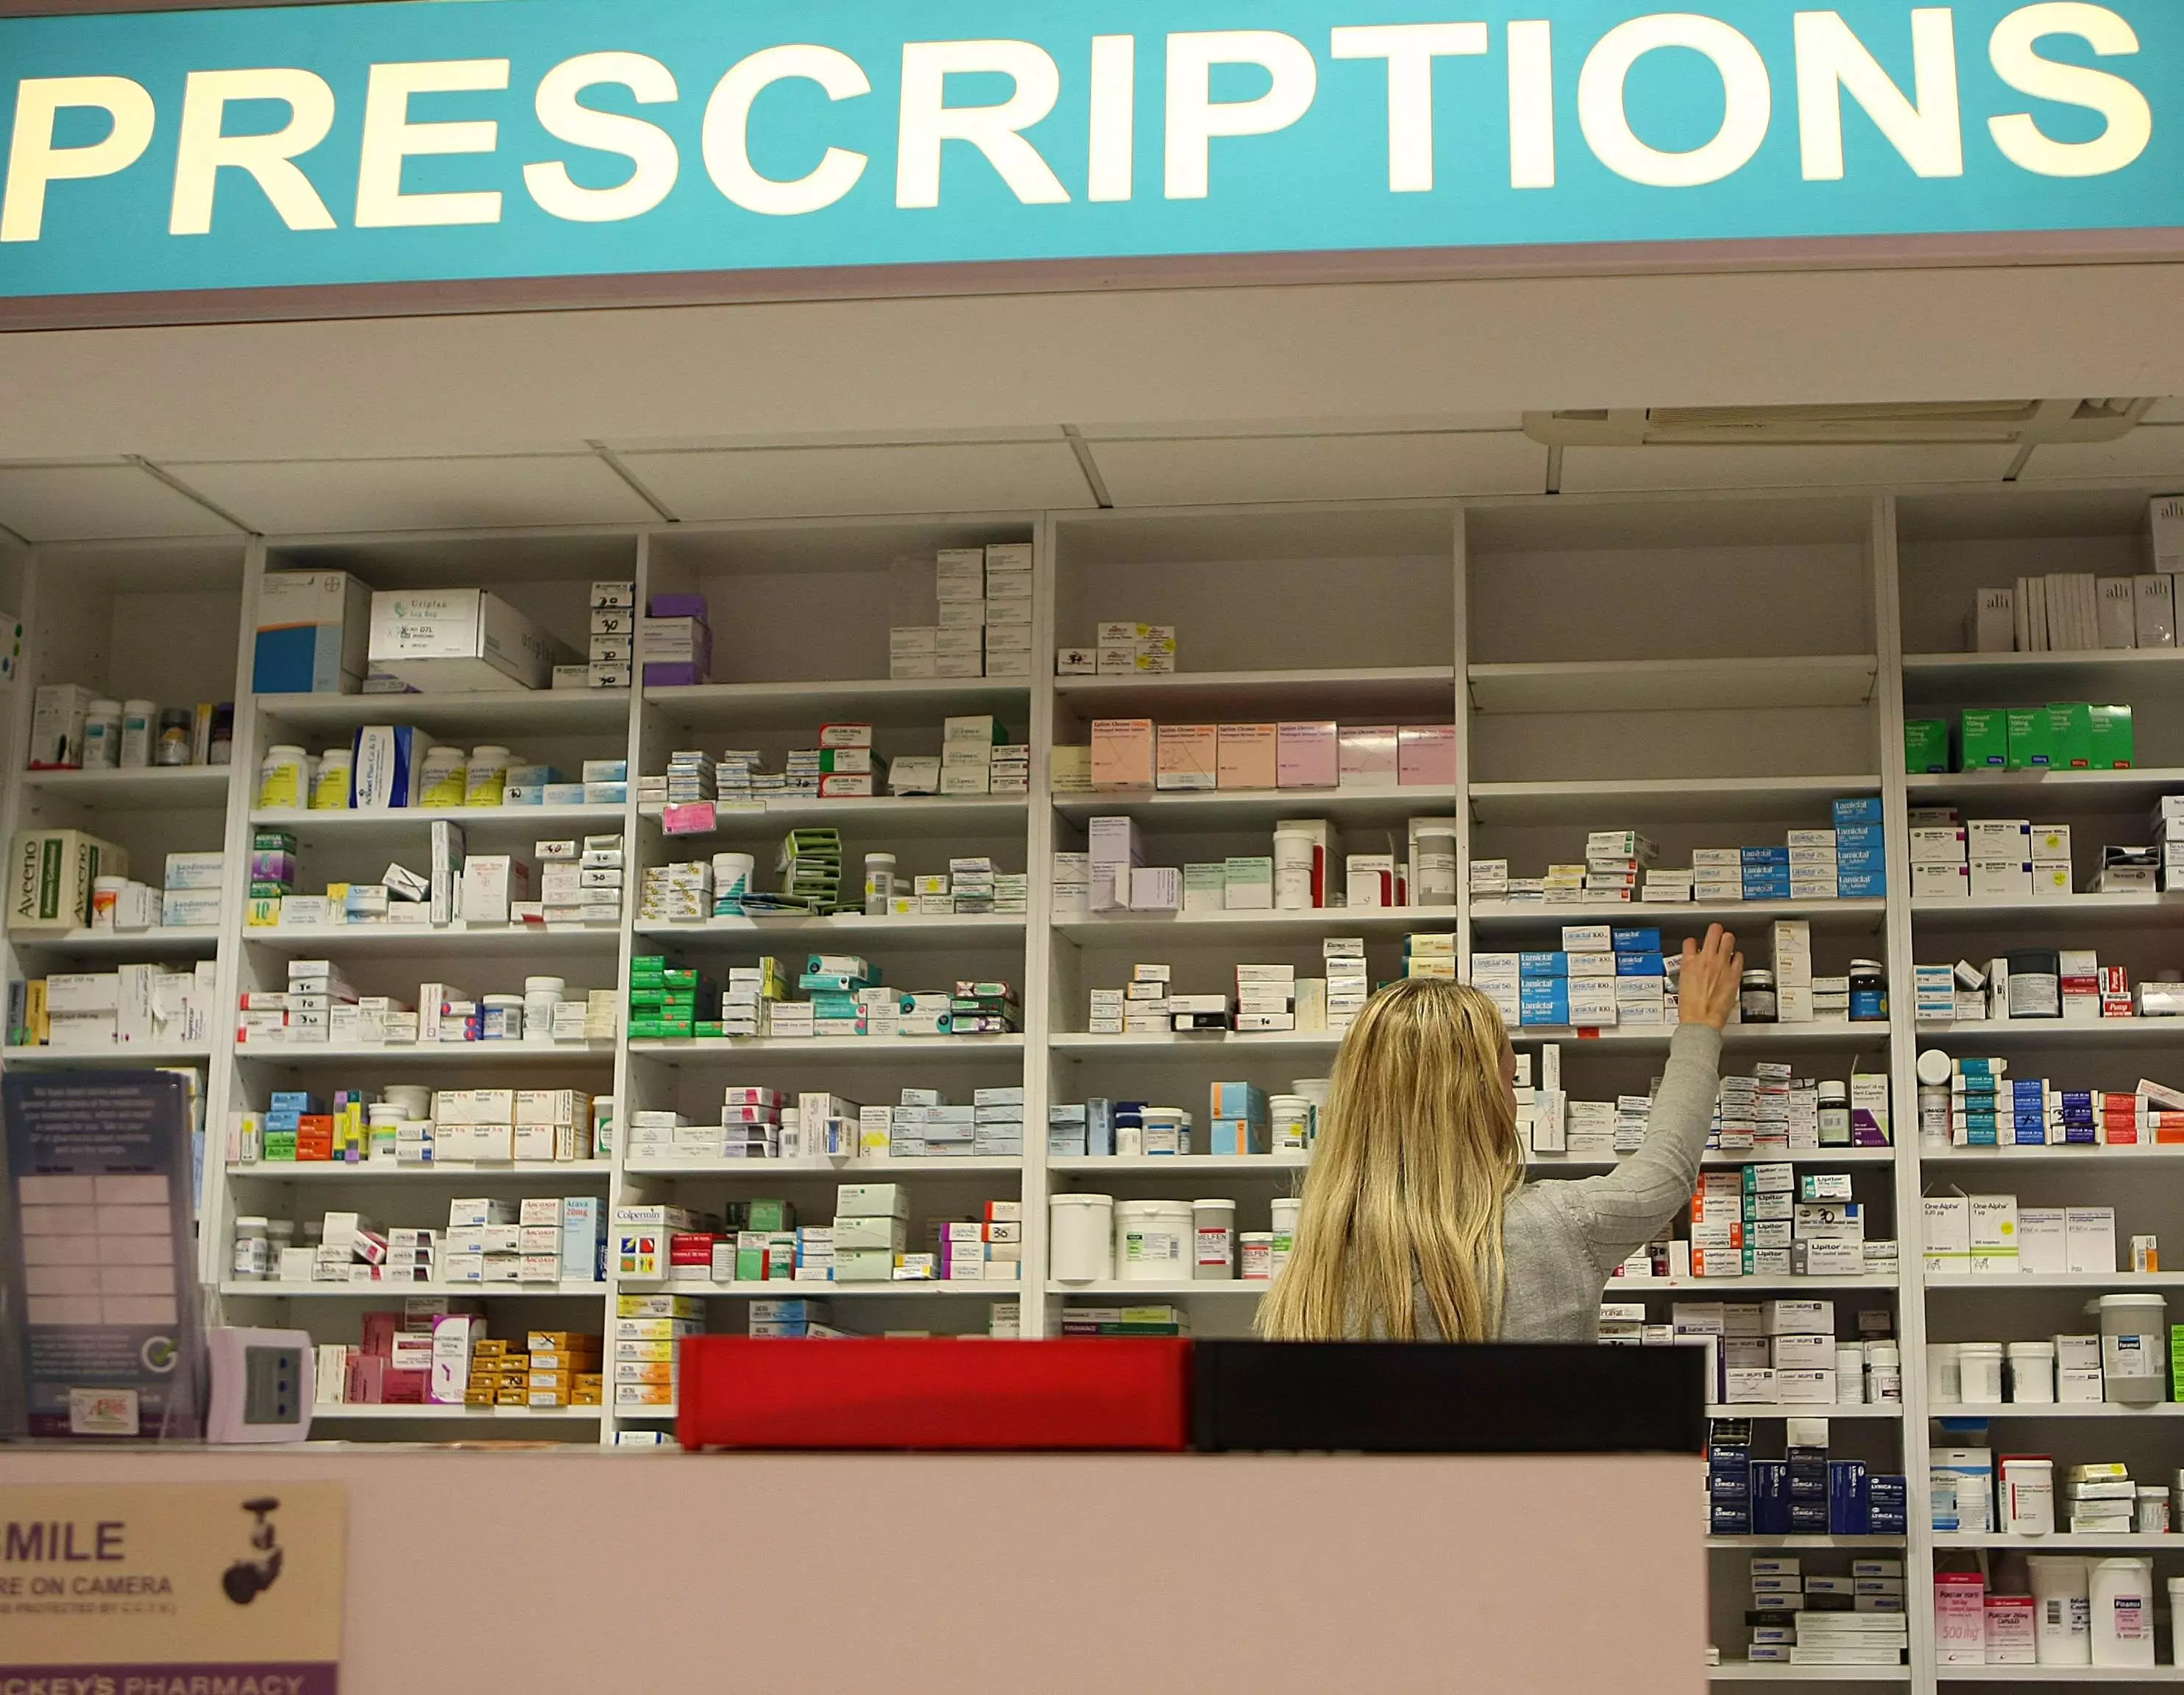 The changes will see prescriptions rise by 20p from £8.80 to £9.